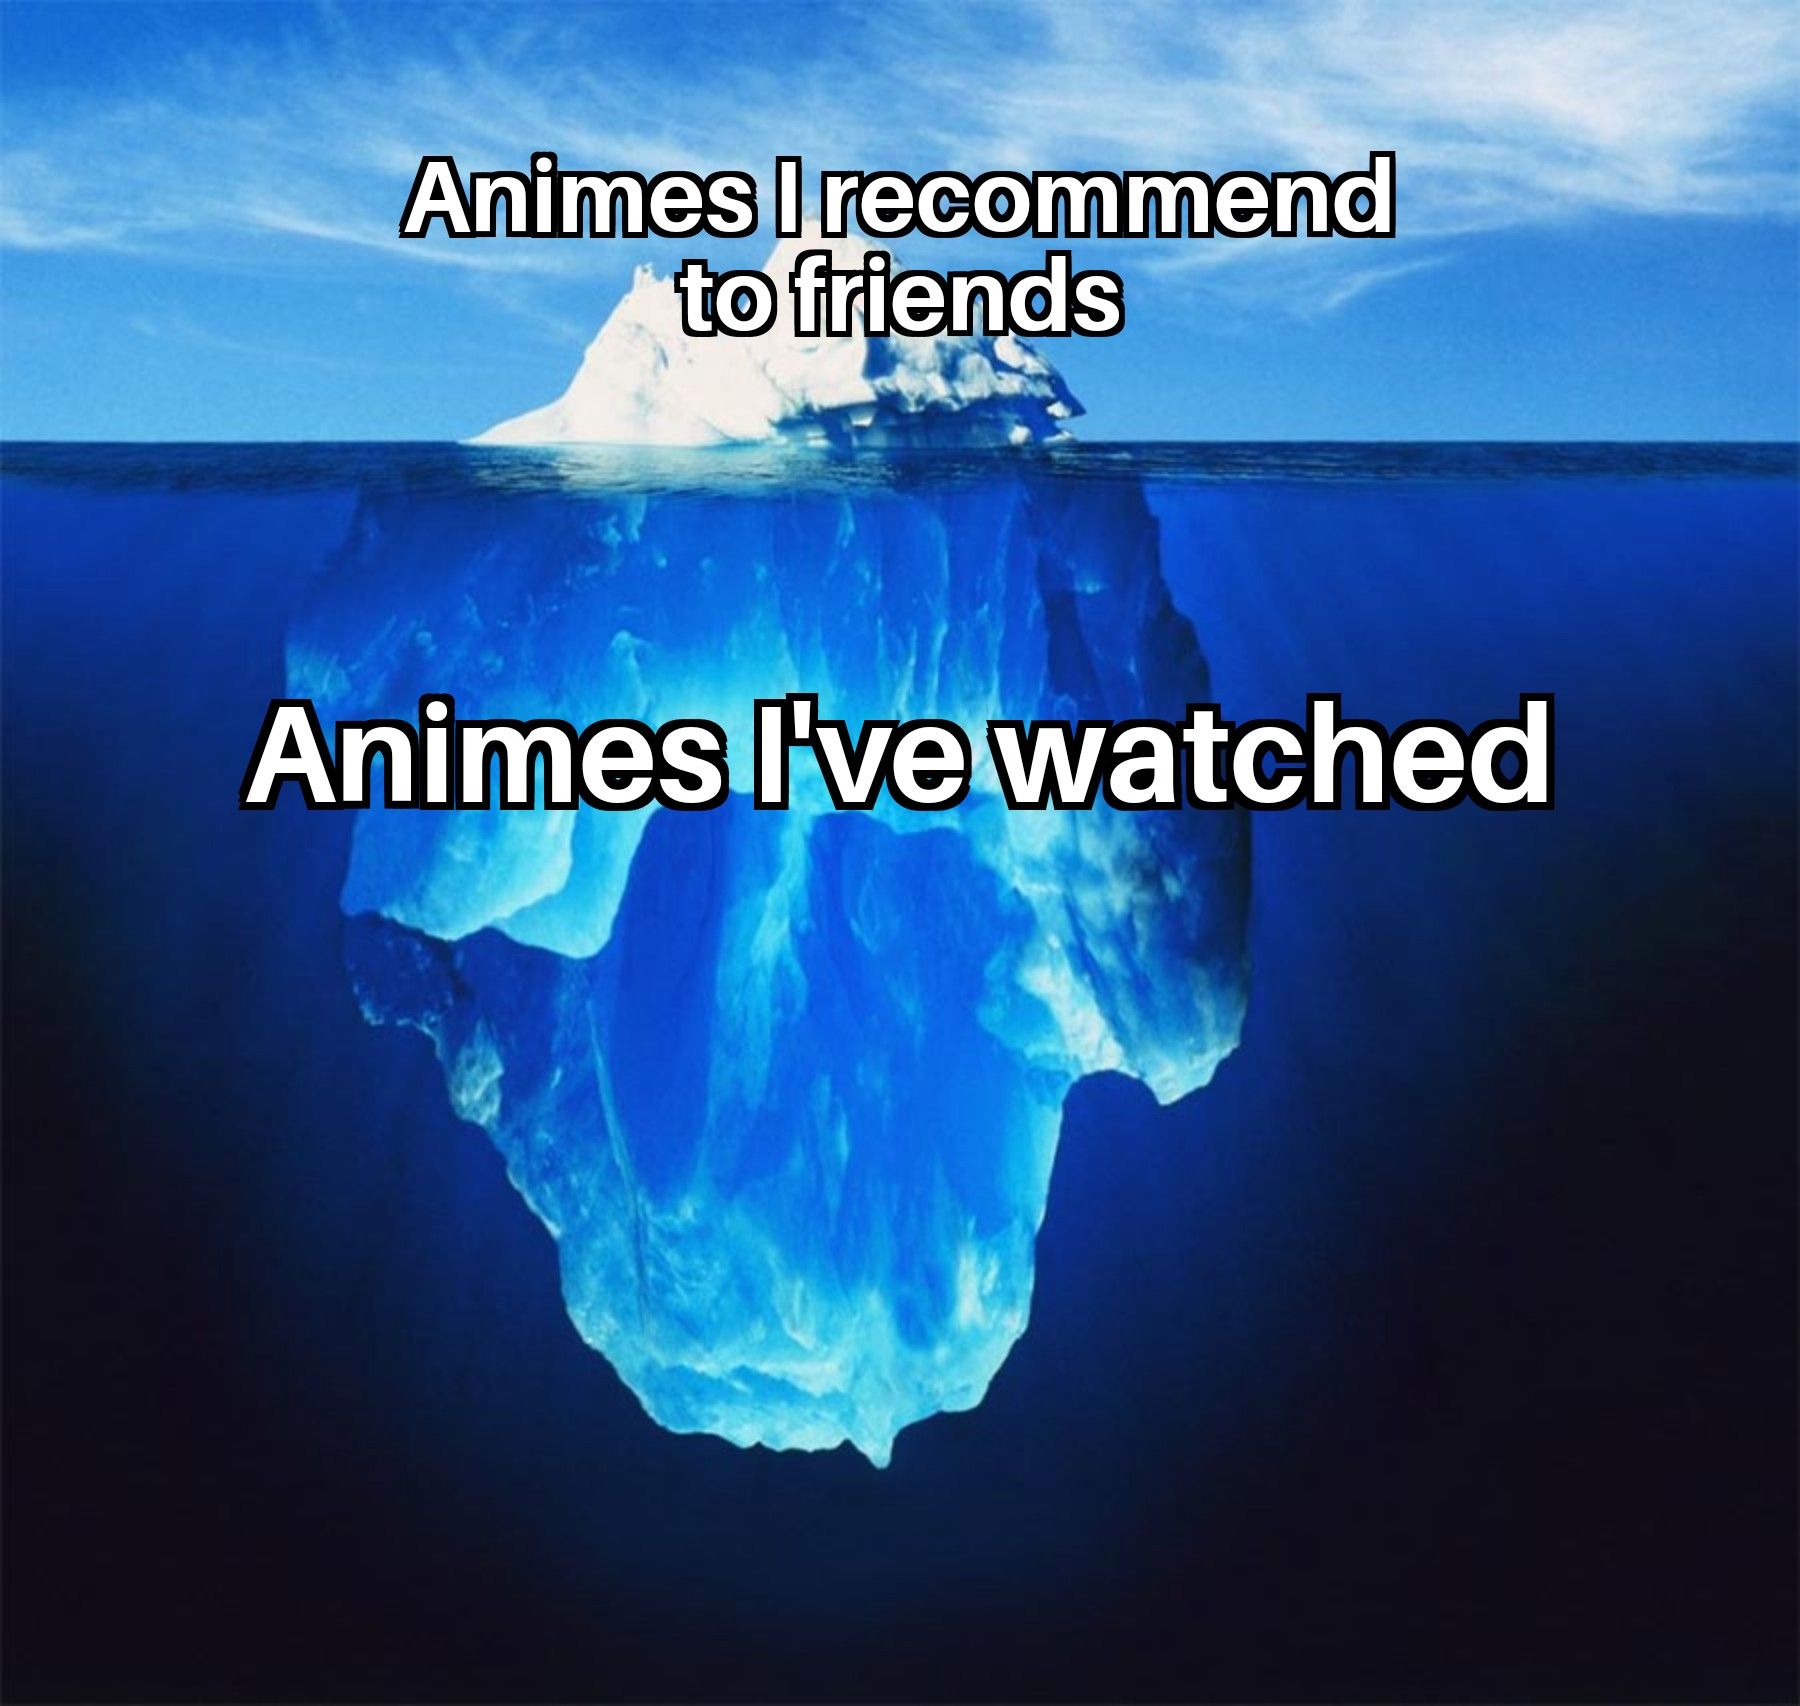 Can't recommend hentai now can I...